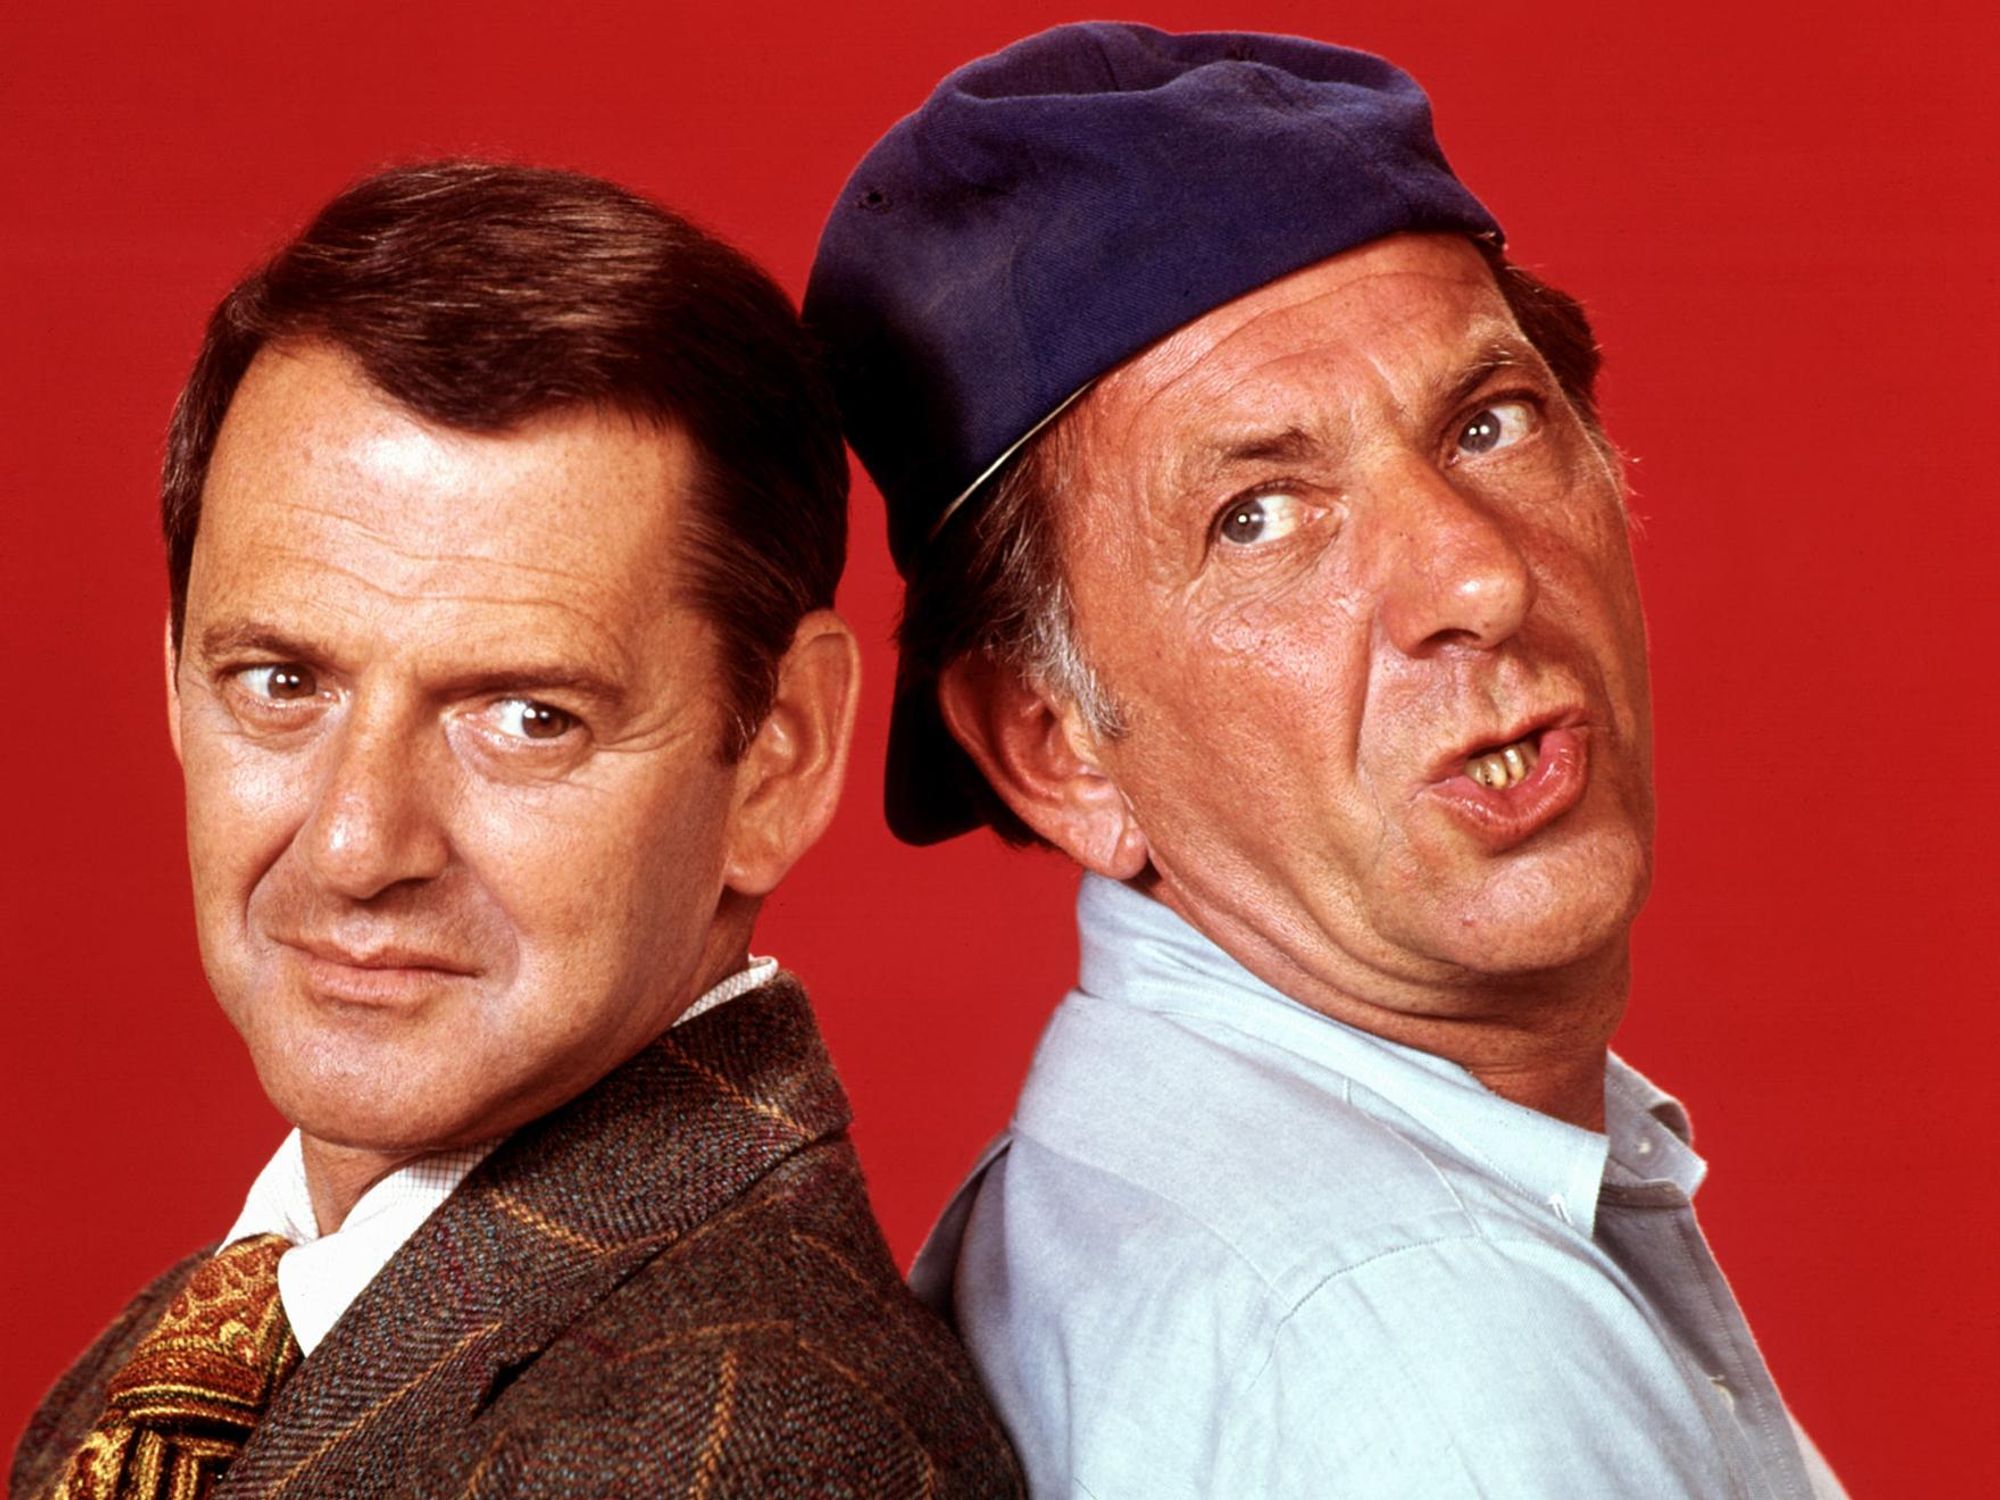 Oscar and Felix from the TV classic The Odd Couple stand back to back against a crimson backdrop.